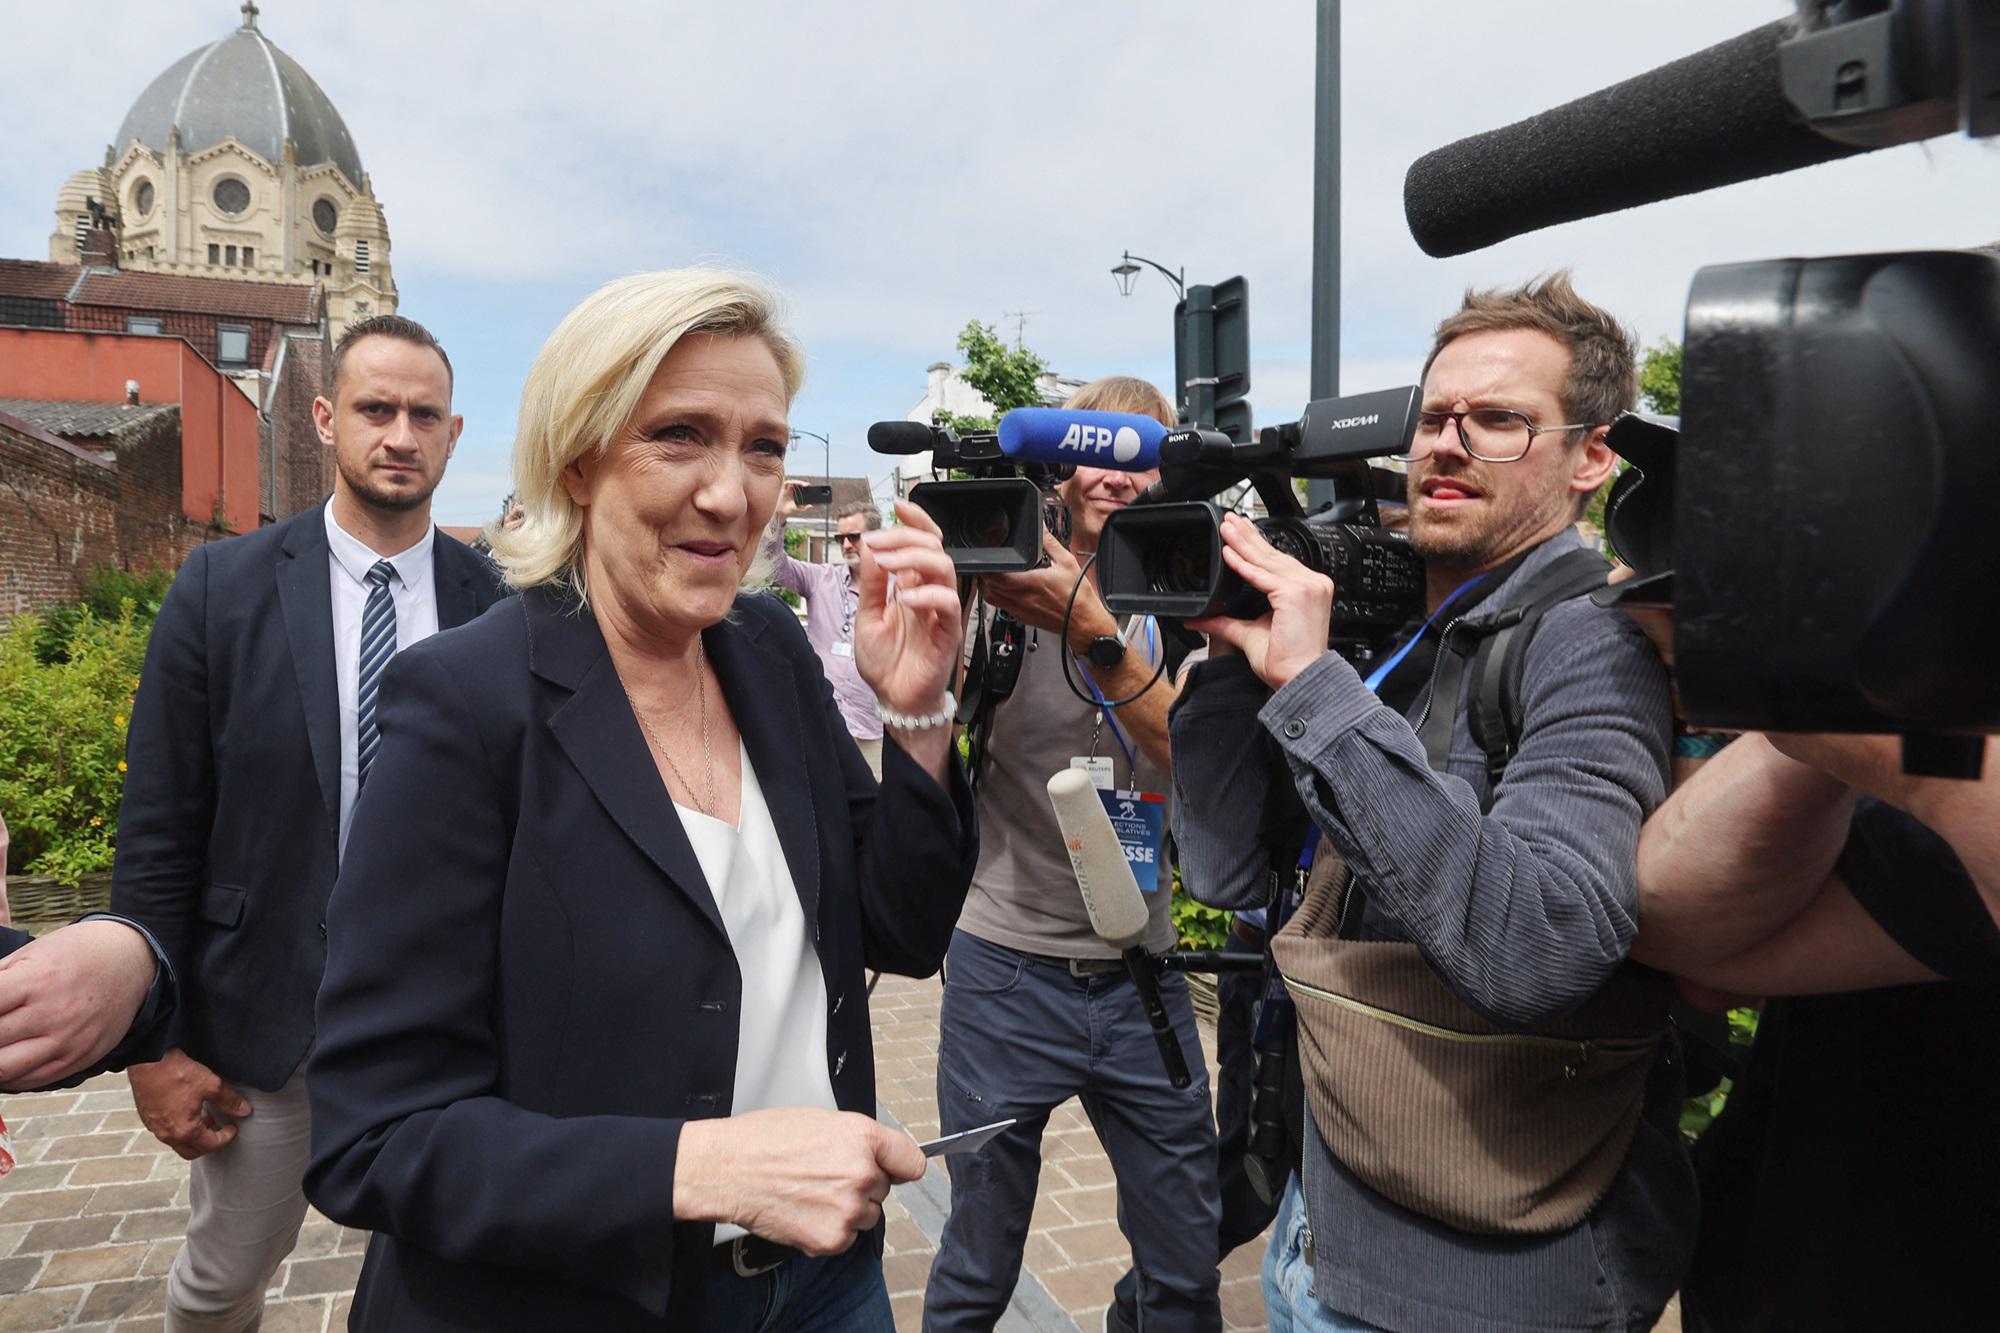 Le Pen Criticizes Macron in France Elections: Accuses him of Seeking Administrative Takeover